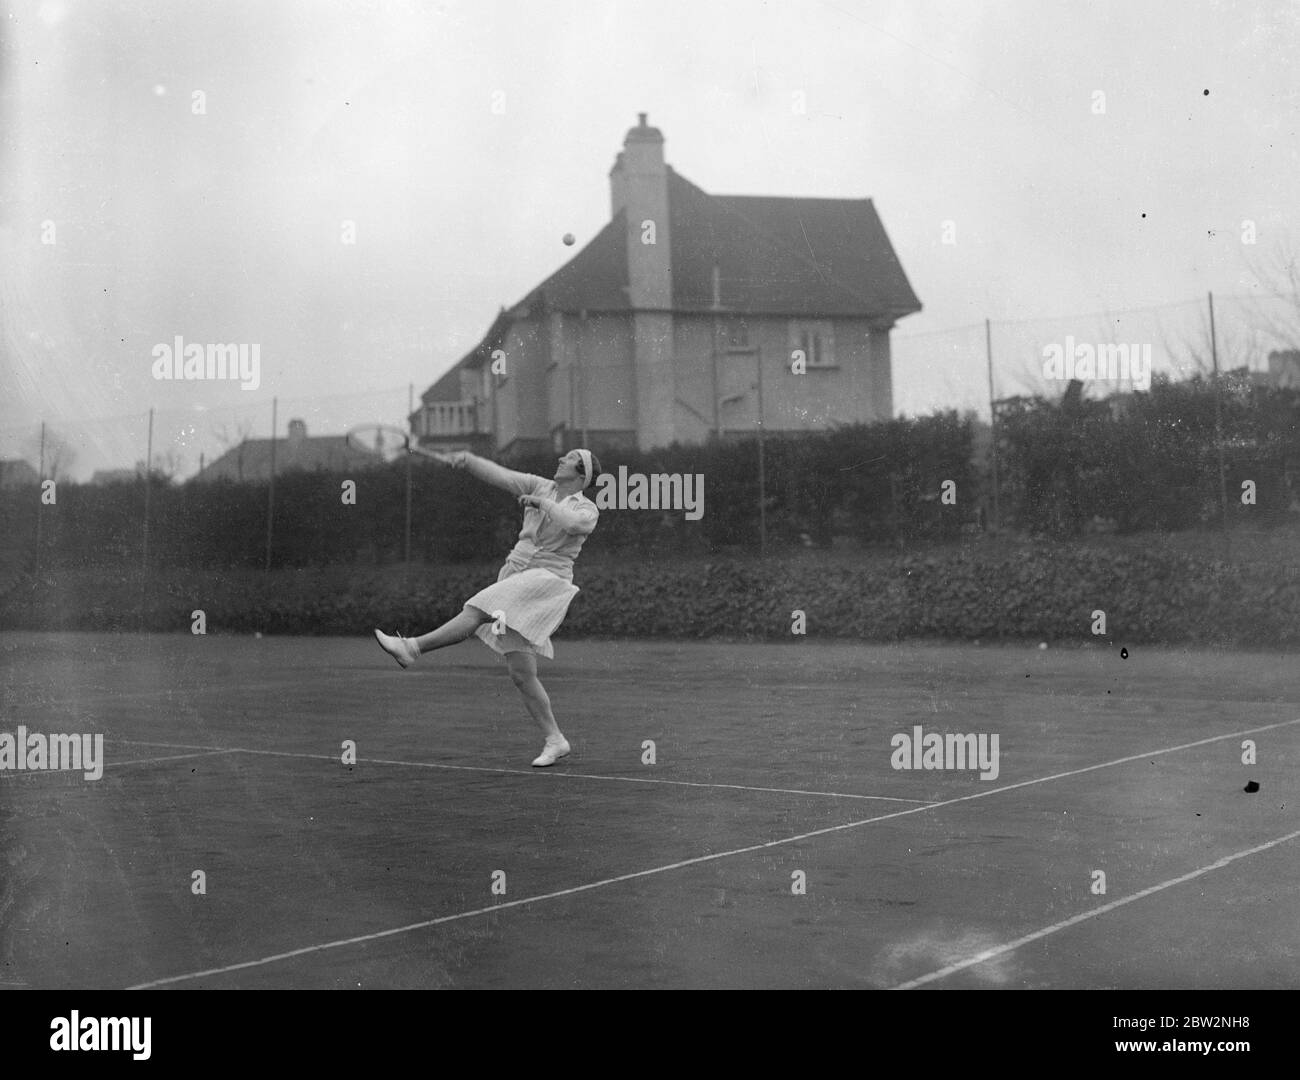 First tennis tournament of the year opens at Sutton . The first lawn tennis tournament of the year , between Surrey and Essex ladies , opened at the Sutton Hard Courts Club , Sutton , Surrey . Miss Phyllis Mudford in play during the opening rounds of the tournament . 26 February 1932 30s, 30's, 1930s, 1930's, thirties, nineteen thirties Stock Photo